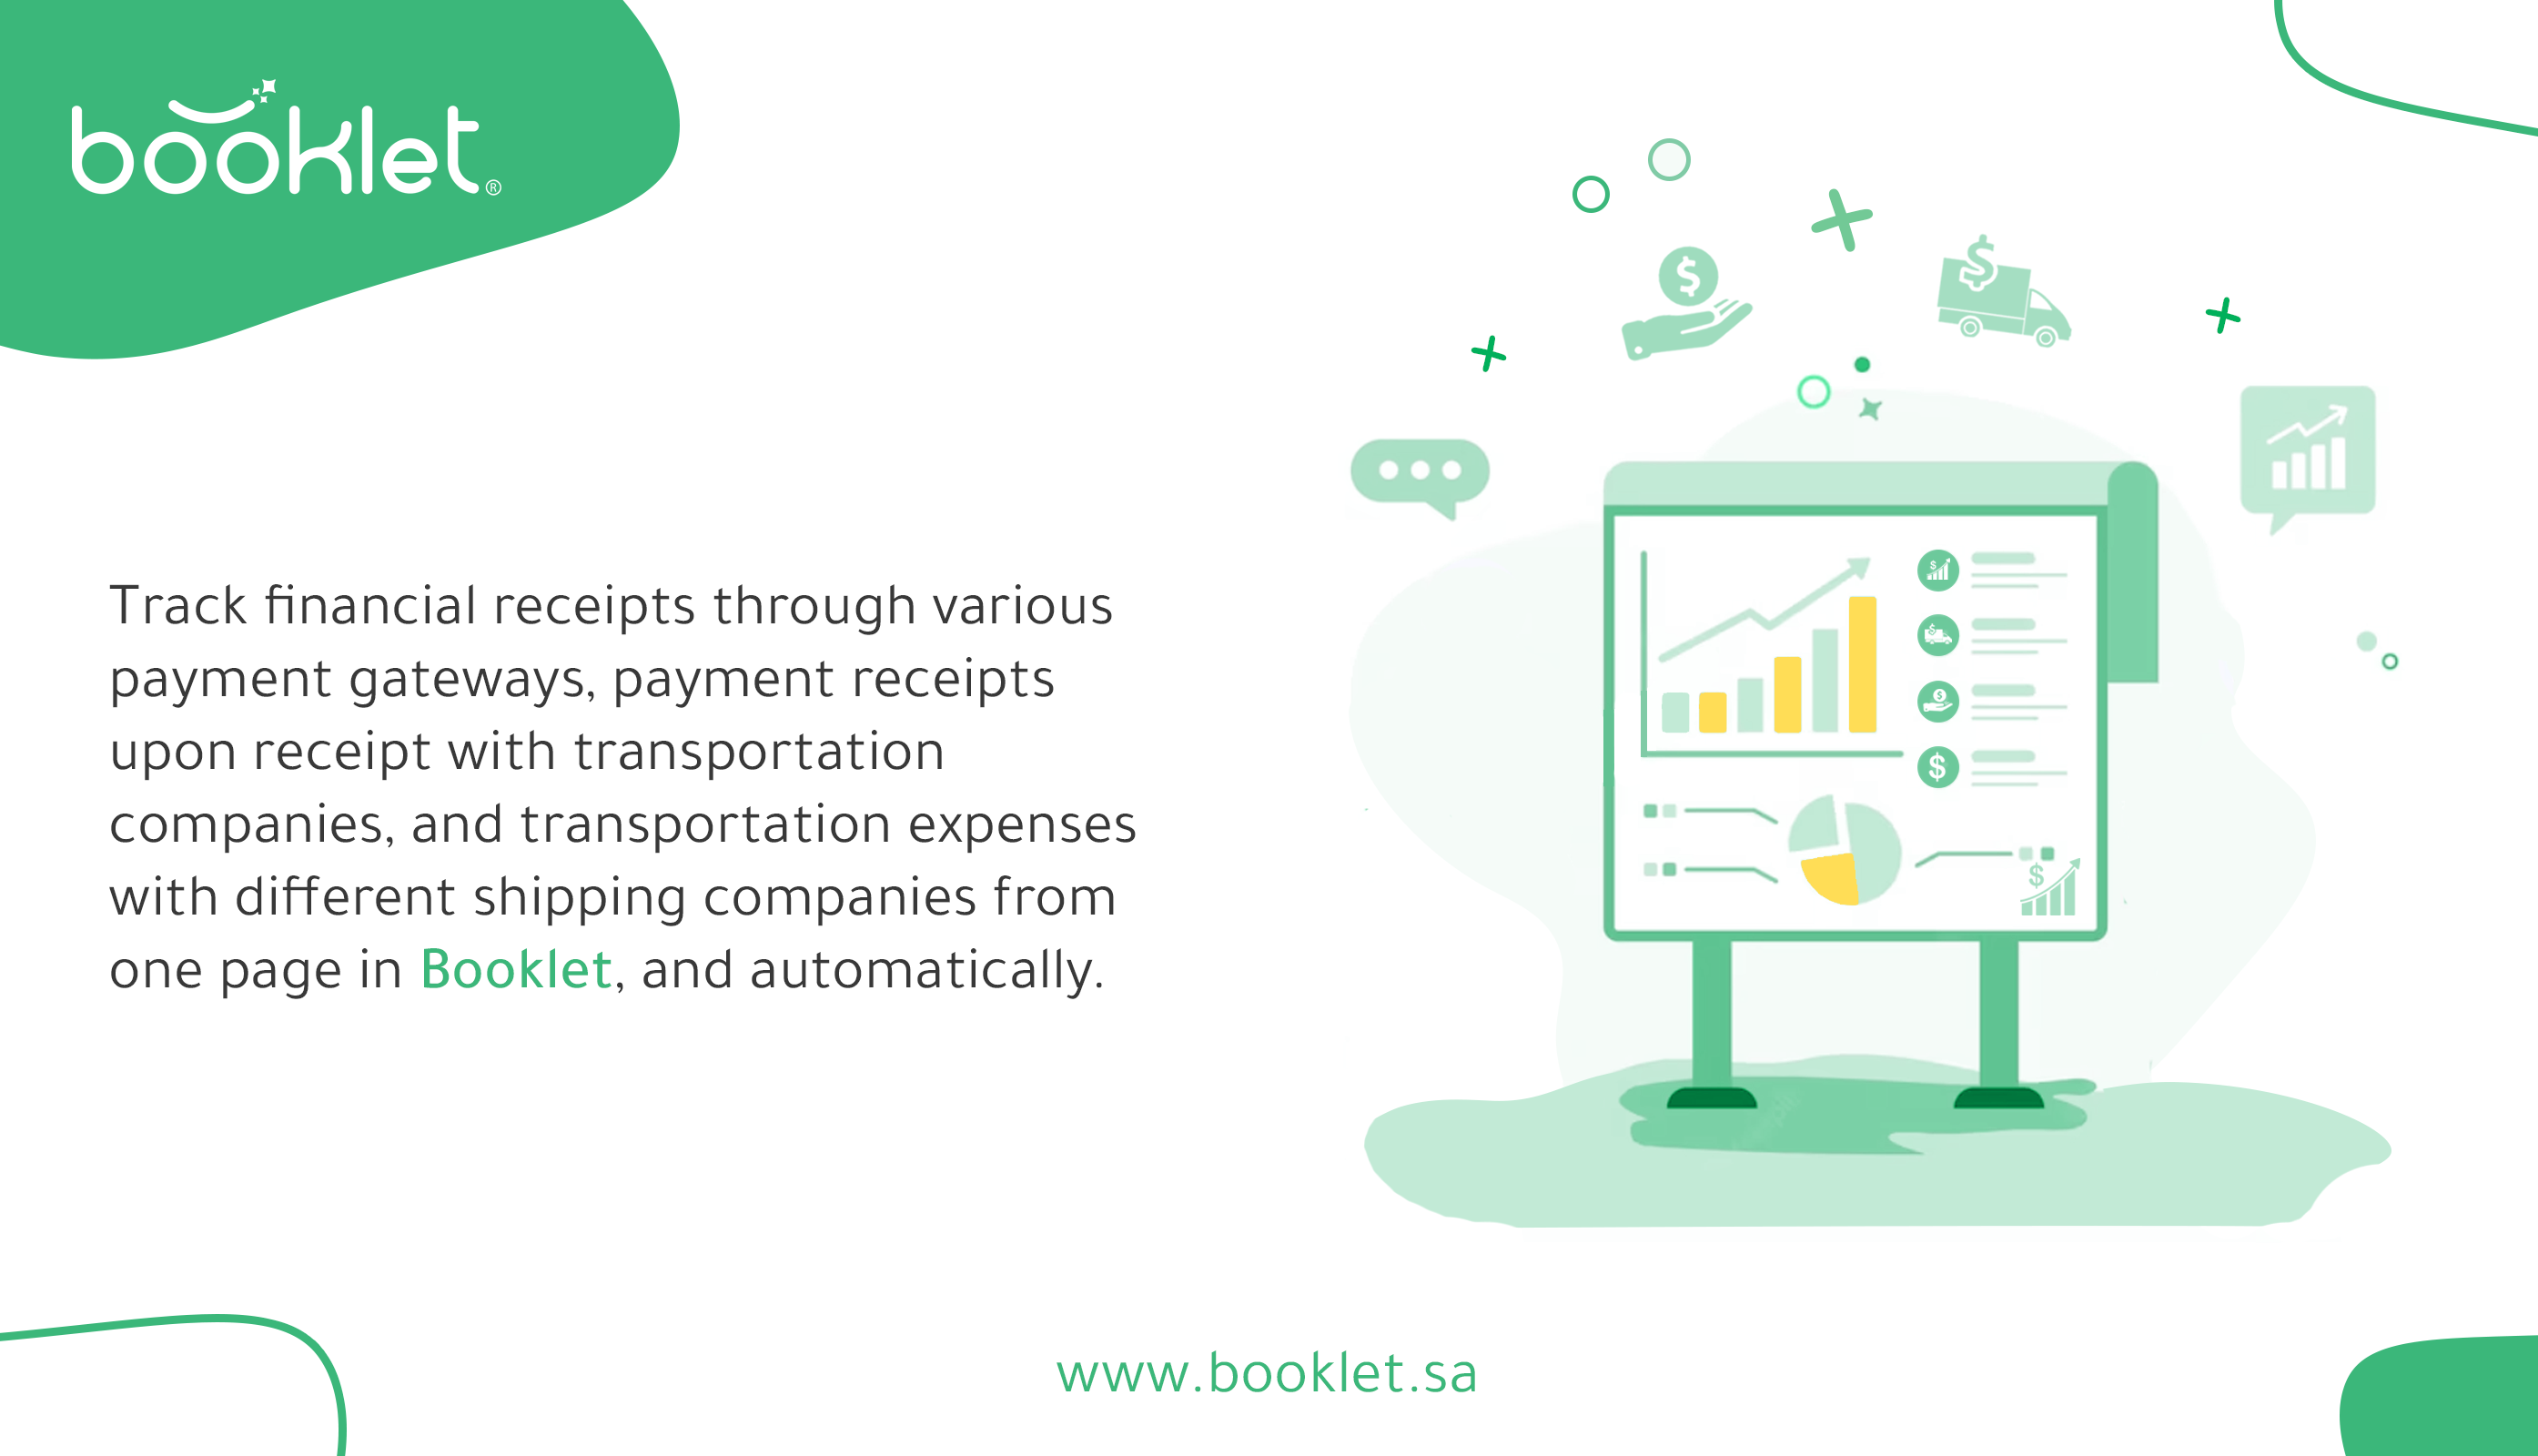 Accounting , Billing & Inventory platform that serves online stores  approved by ZATCA